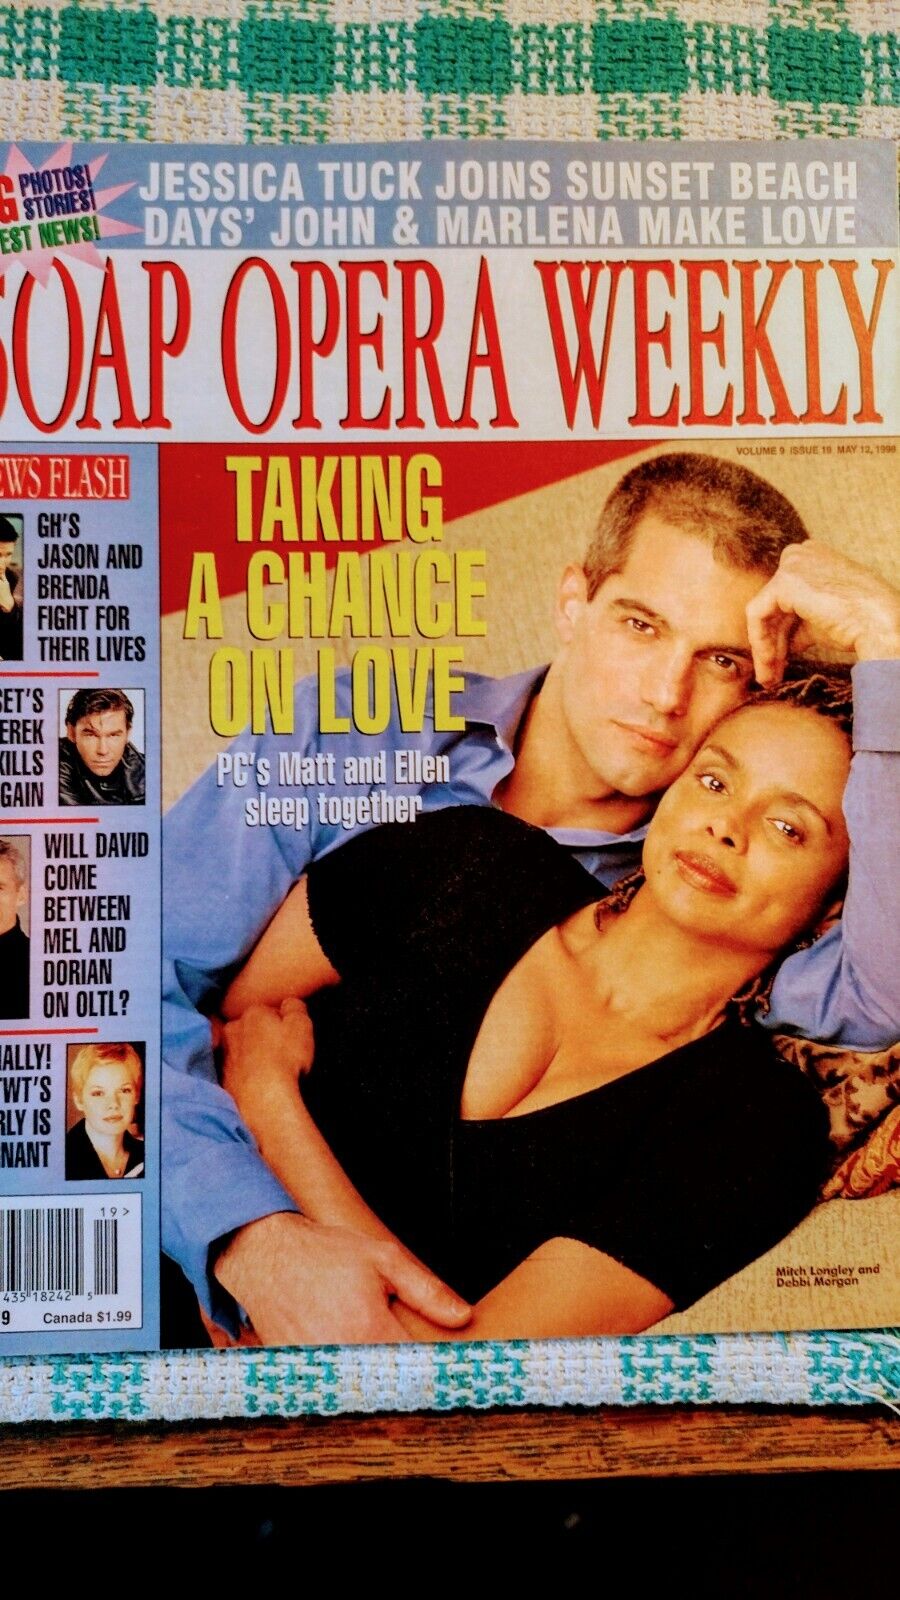 SOAP OPERA WEEKLY MAY 12,1998 TAKING A CHANCE ON LOVE. Без бренда 1047-7128